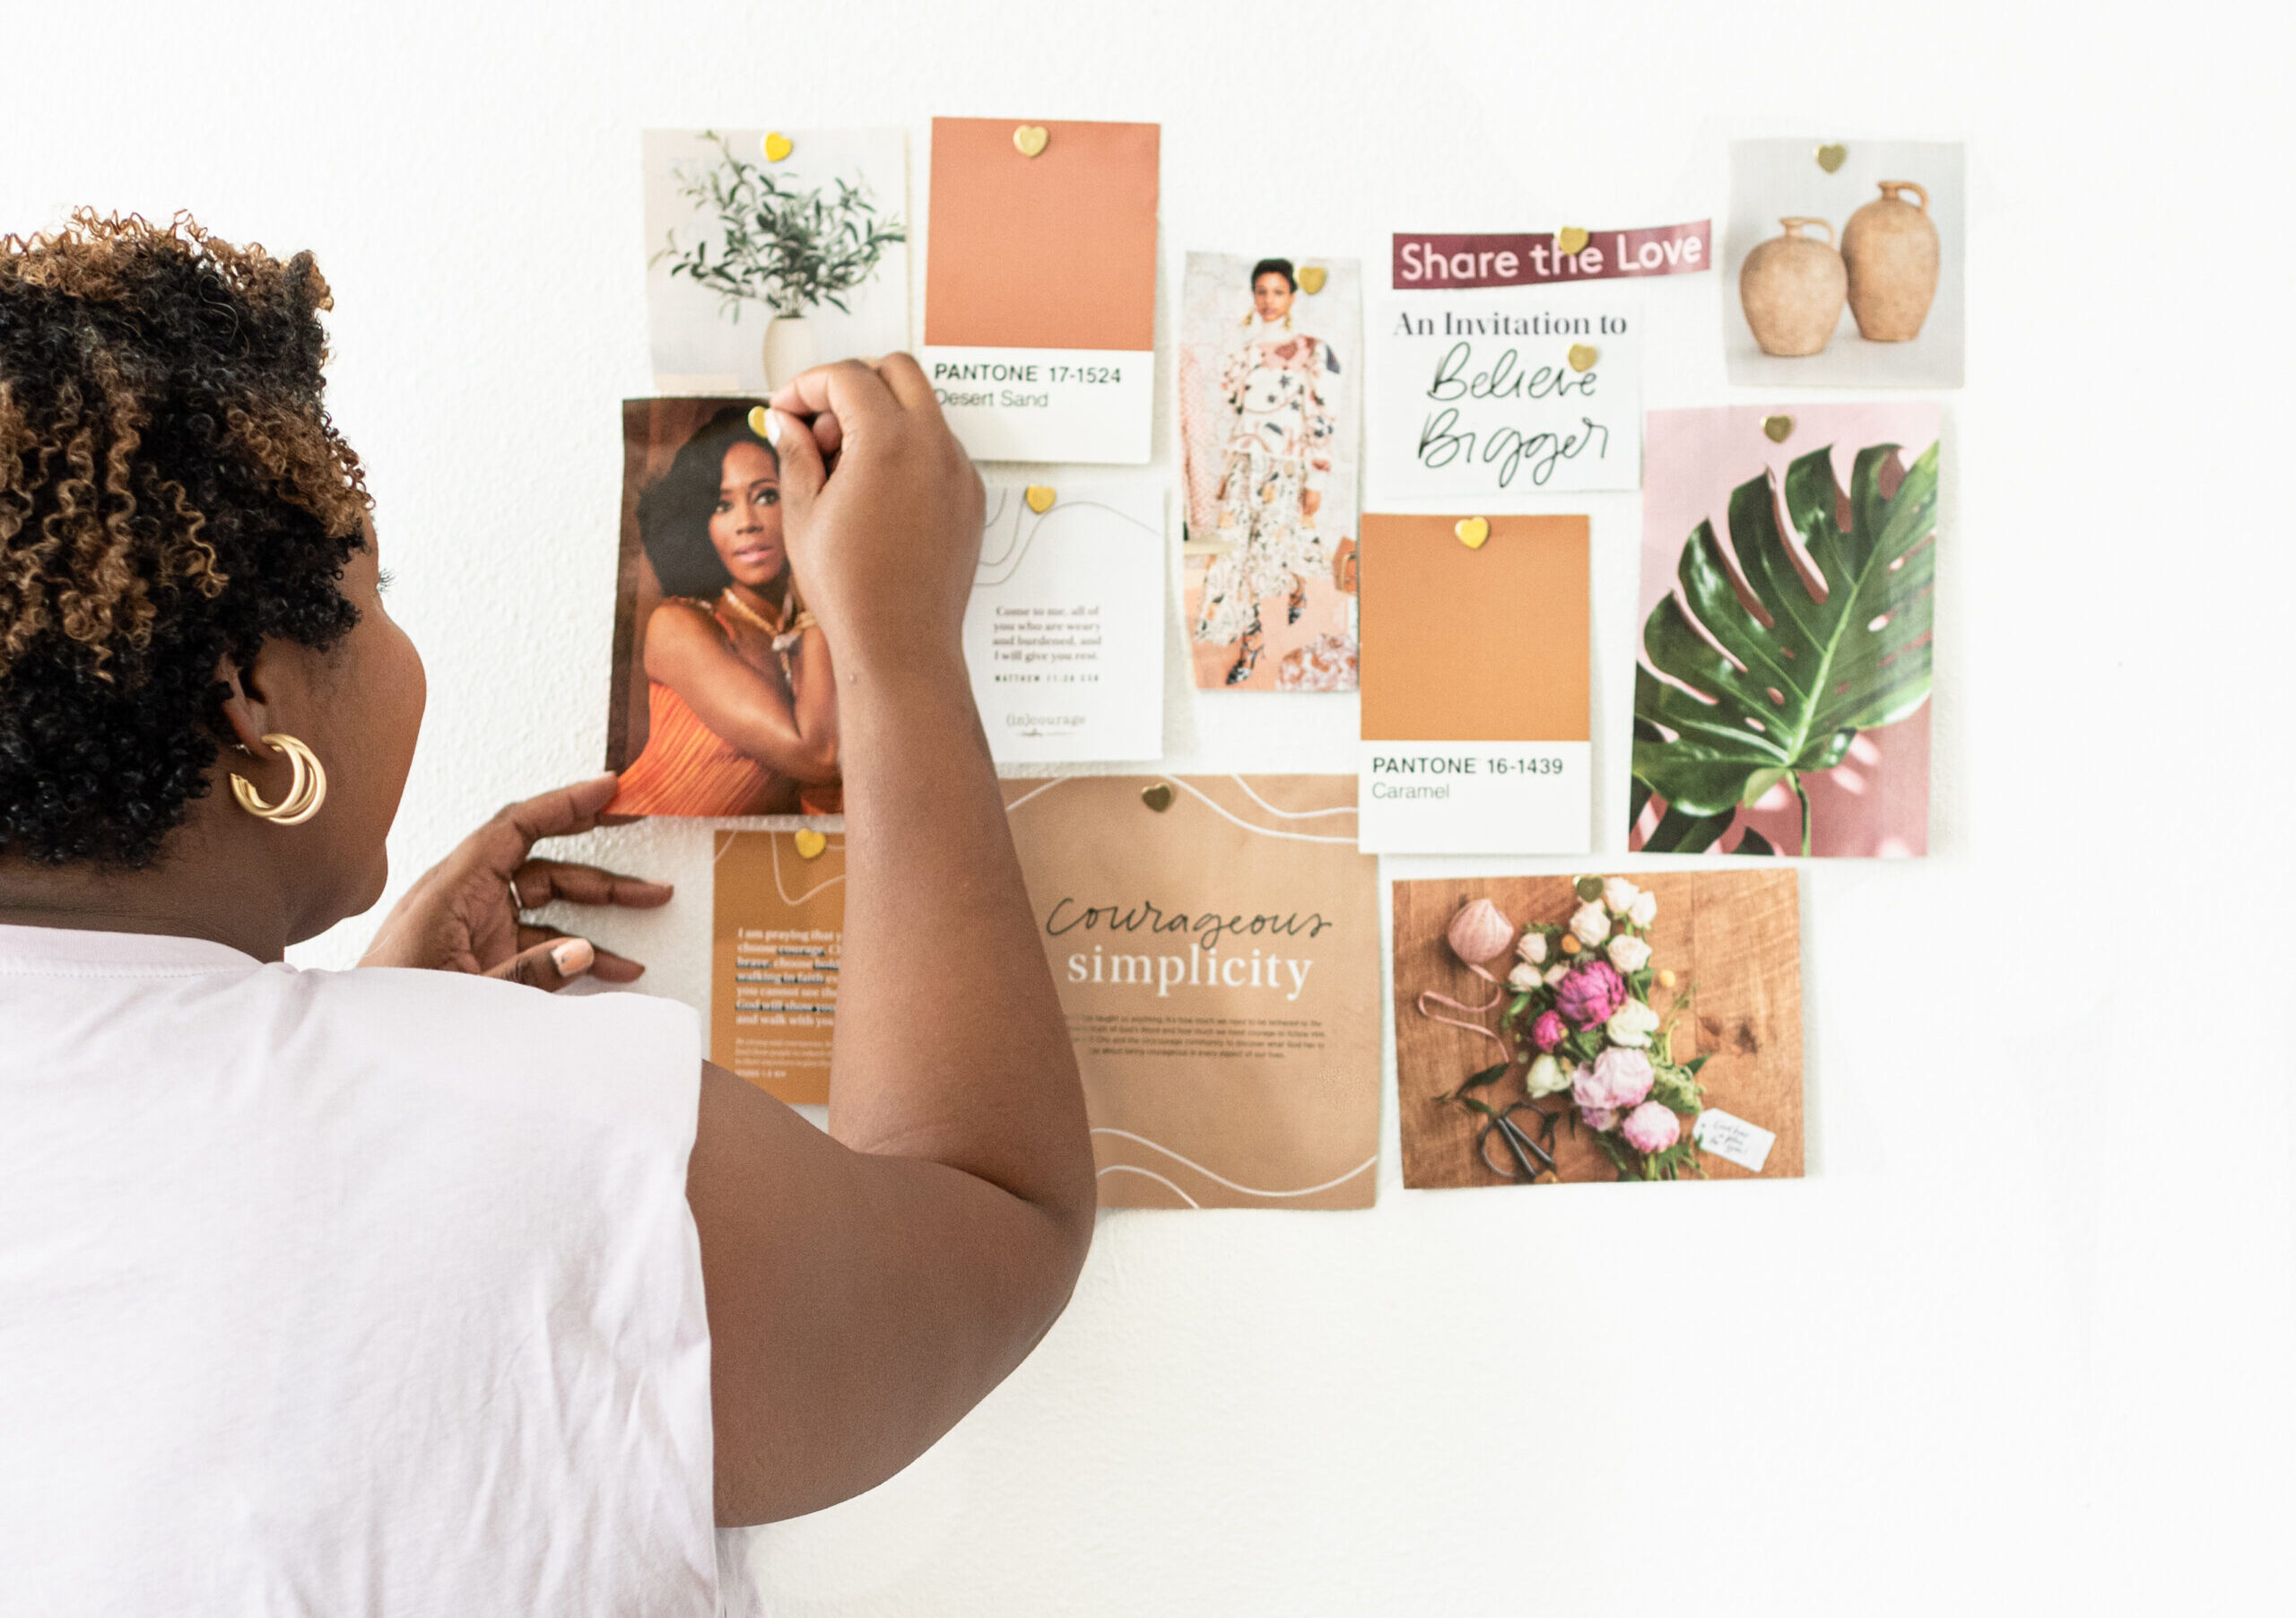 Woman putting up mood boards